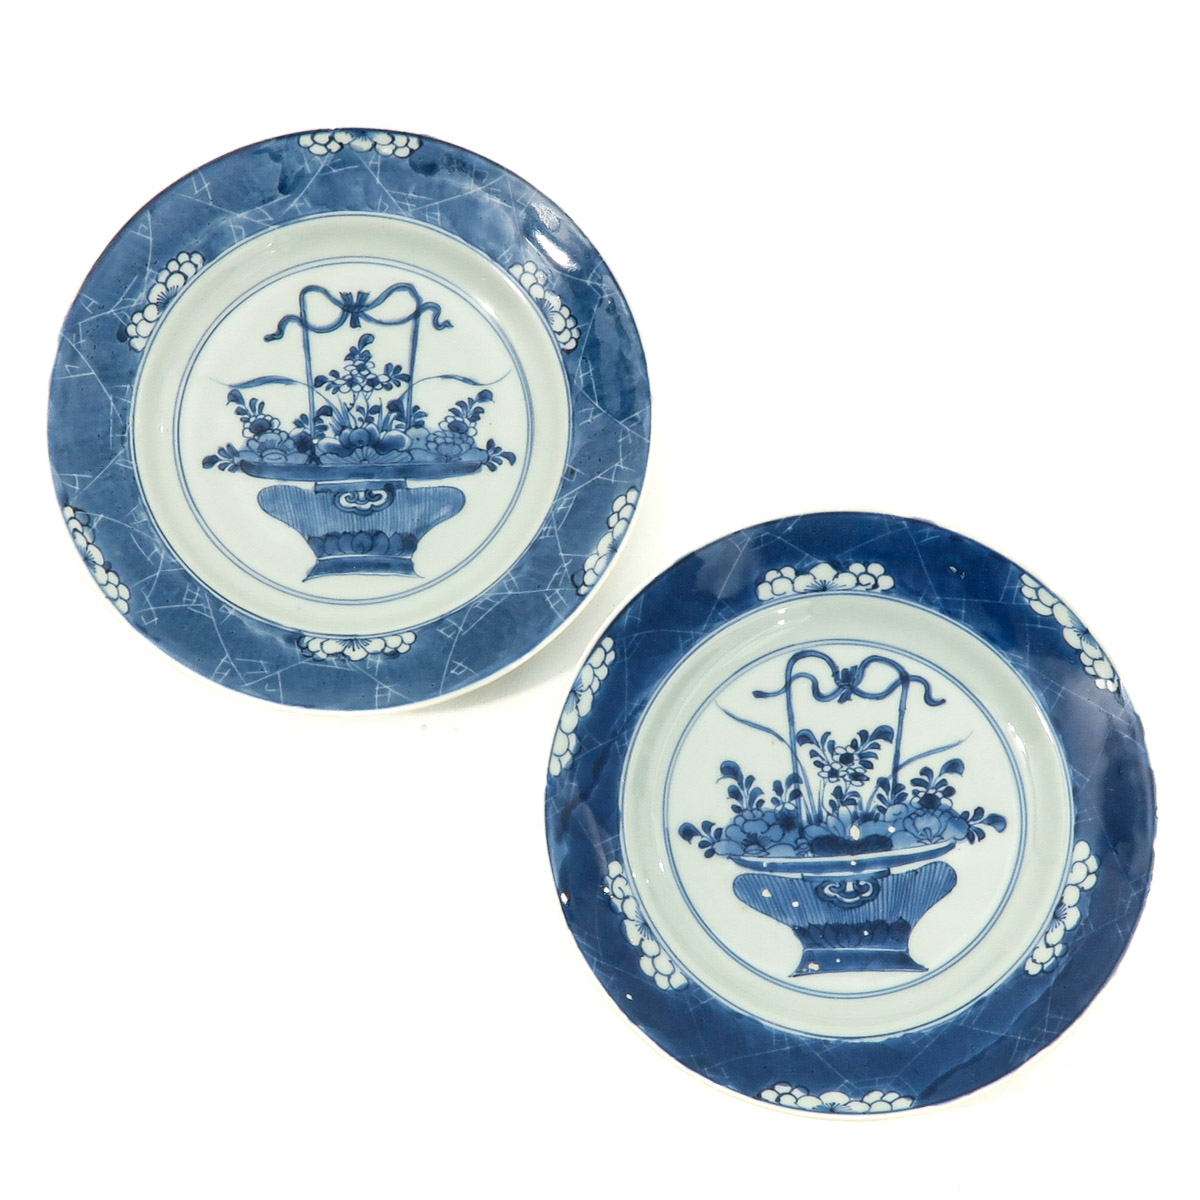 A Series of 6 Blue and White Plates - Image 5 of 10